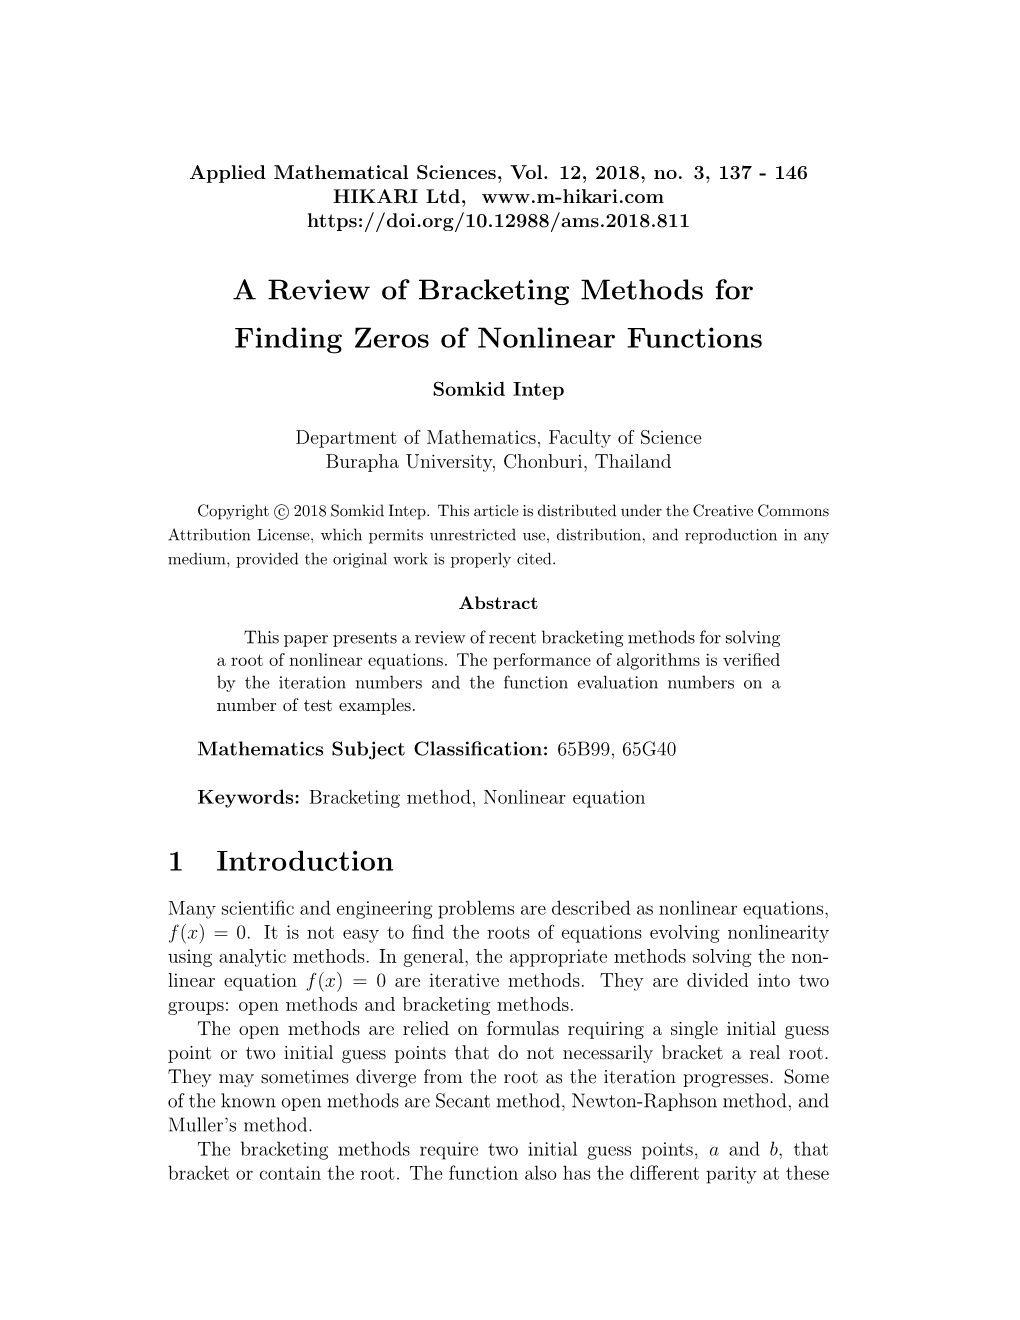 A Review of Bracketing Methods for Finding Zeros of Nonlinear Functions